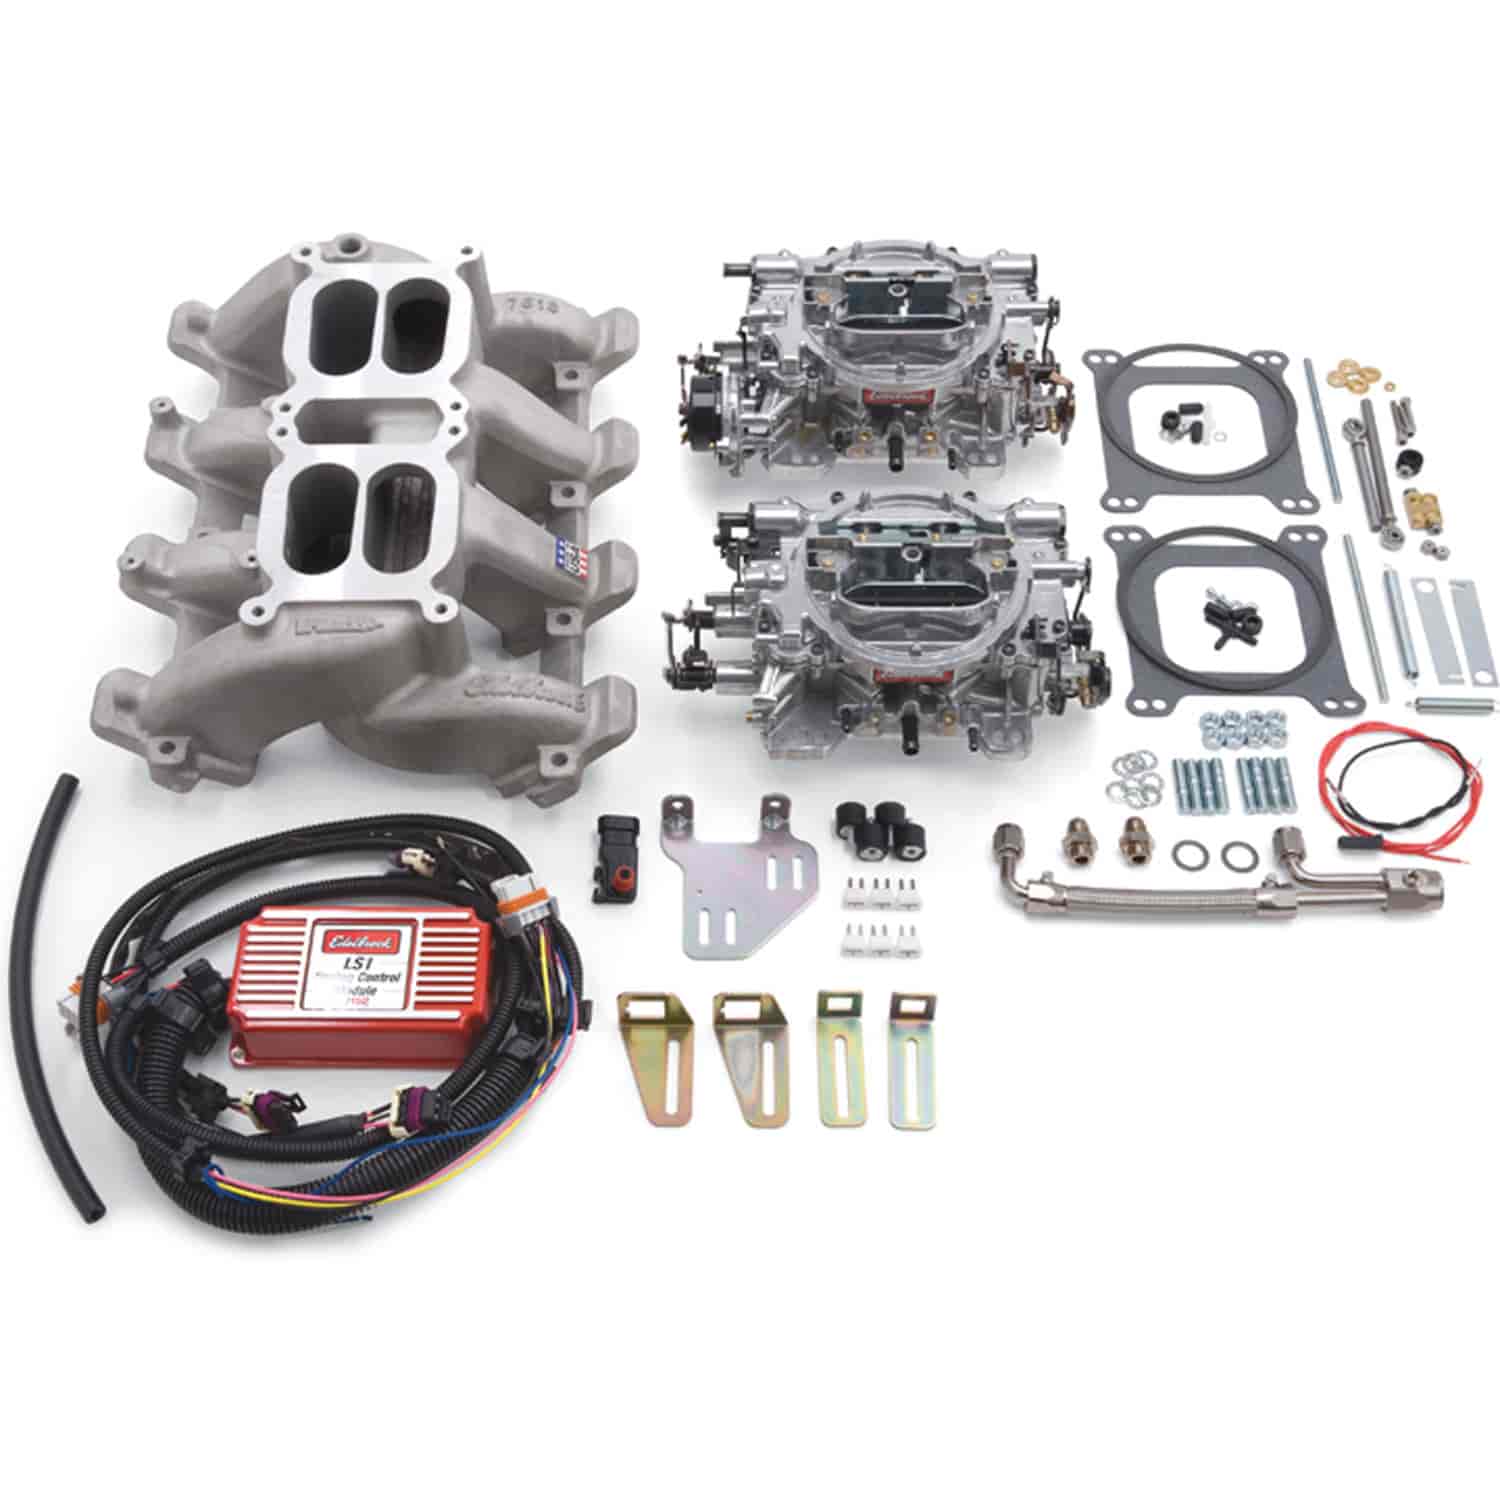 RPM Dual-Quad Manifold and Carburetor Kit for Chevy GEN III LS1